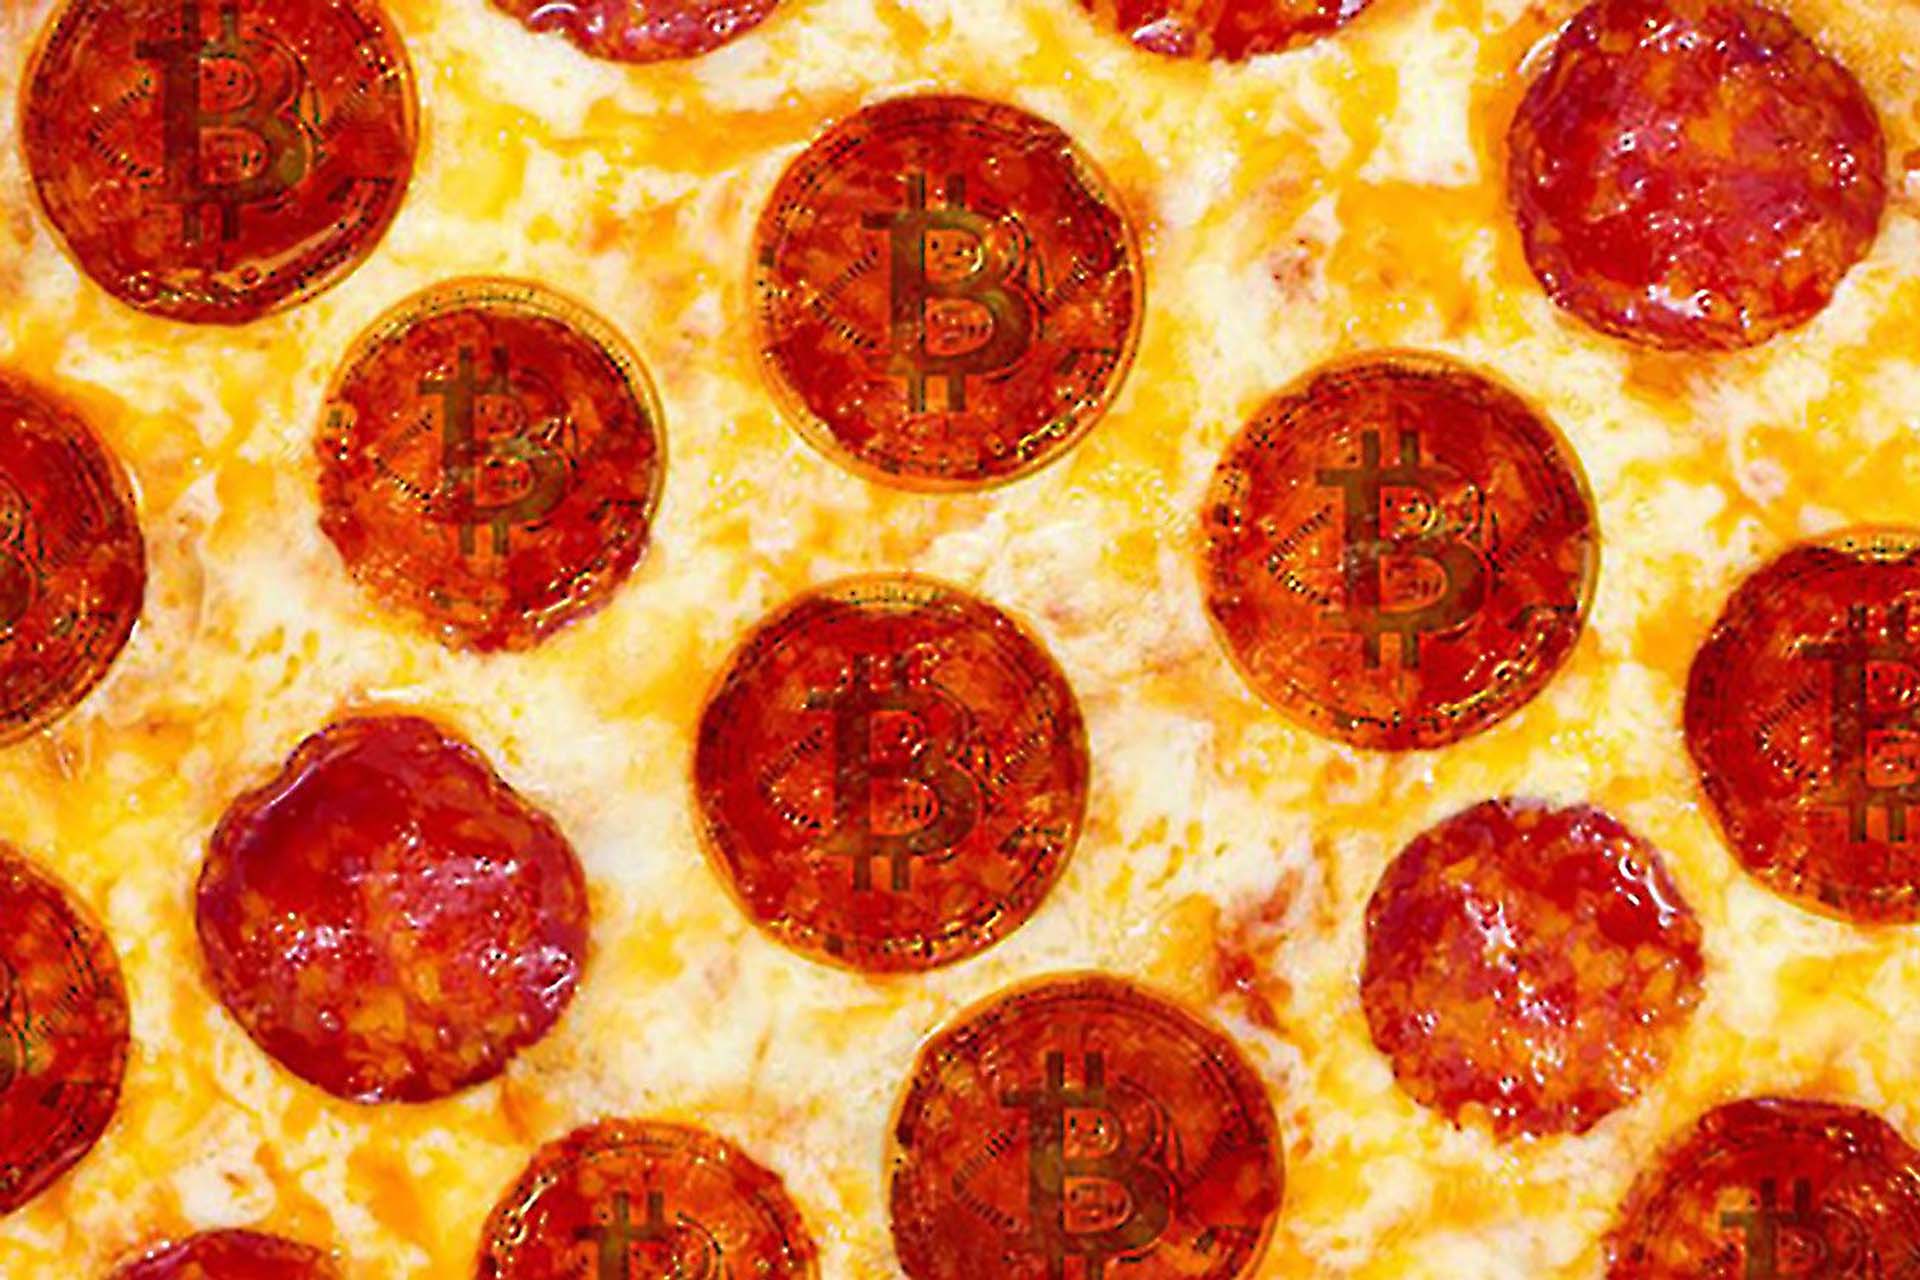 The World Celebrates the 8th Anniversary of the First Bitcoin Transaction: Buying Two Pizzas